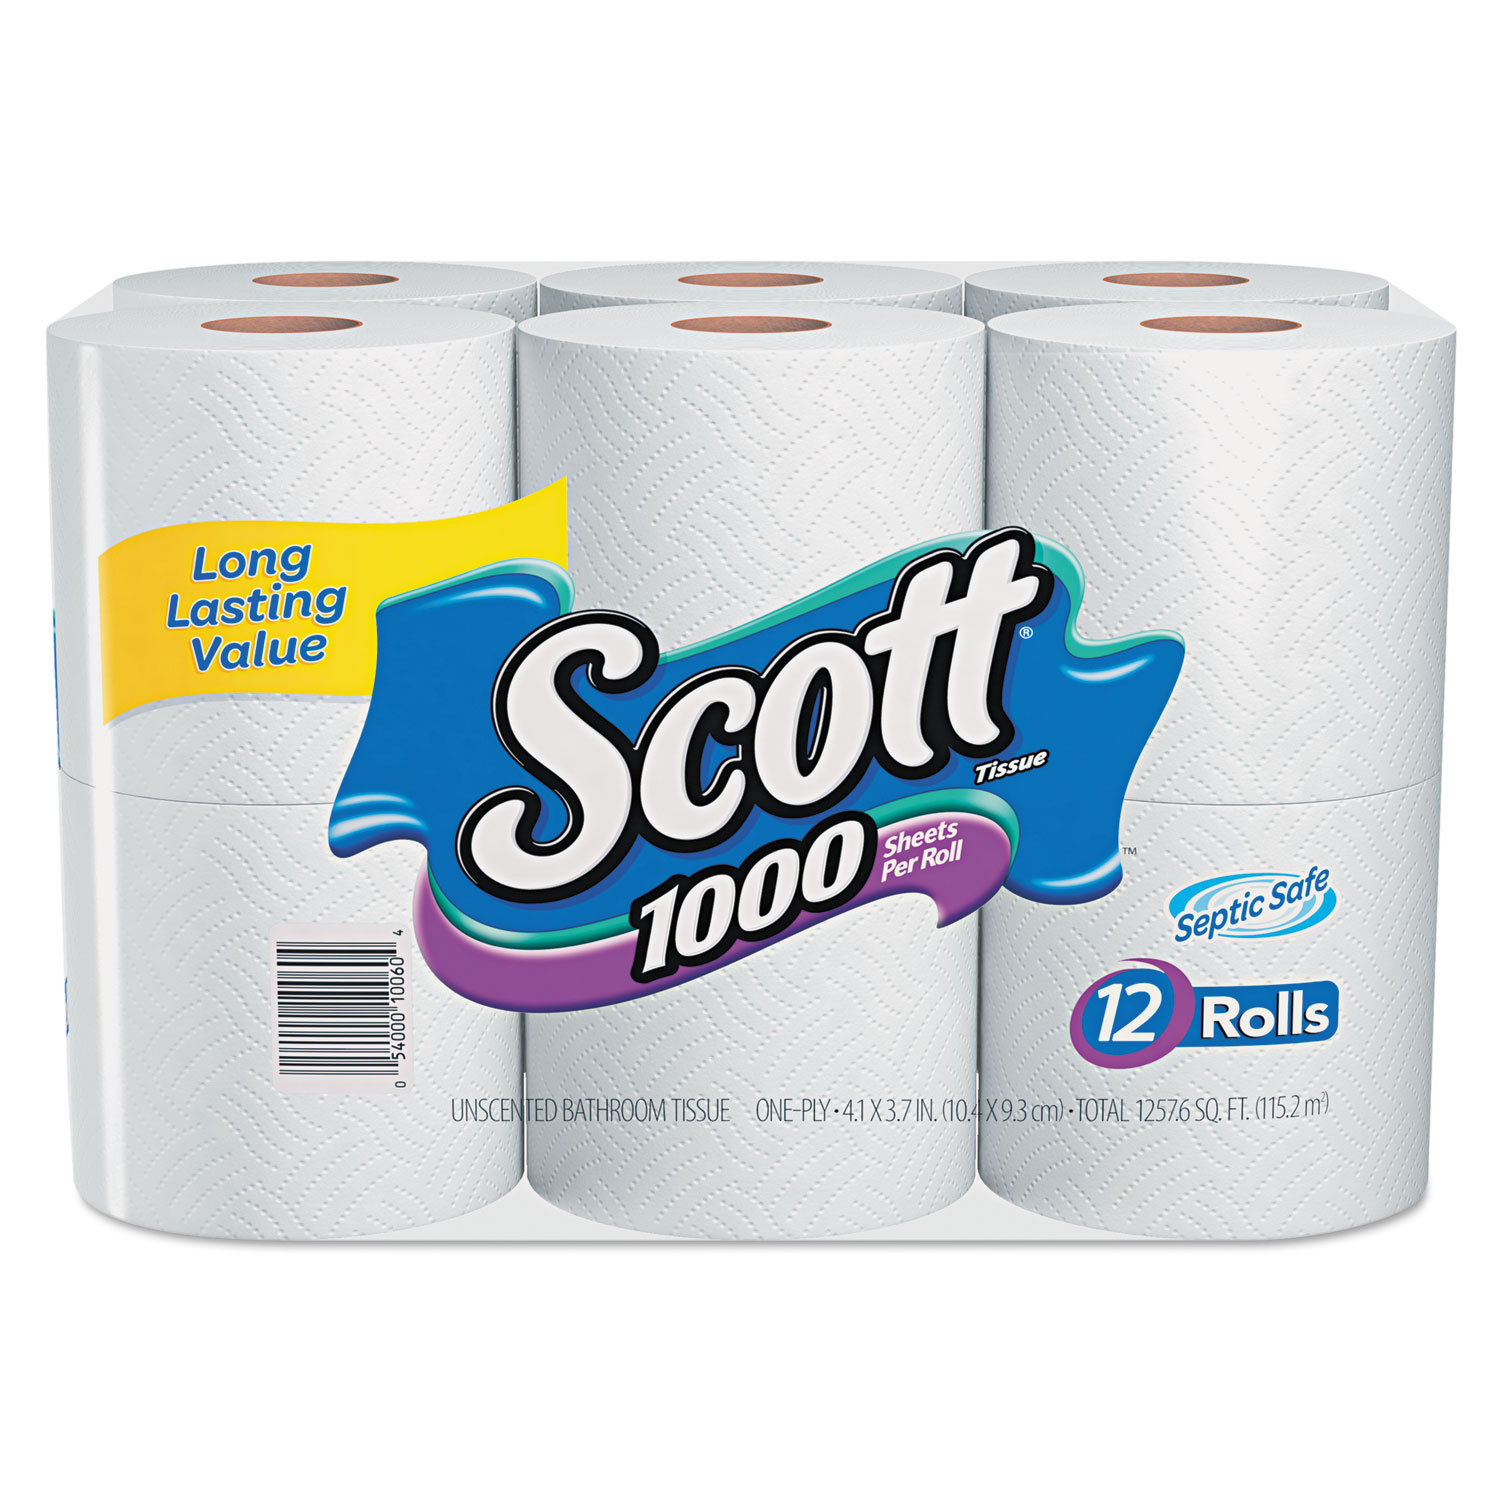 Scotts Toilet Paper, 1-Ply, 1000 Sheets/Roll, 12 Rolls/Pack, 4 Pack/Carton